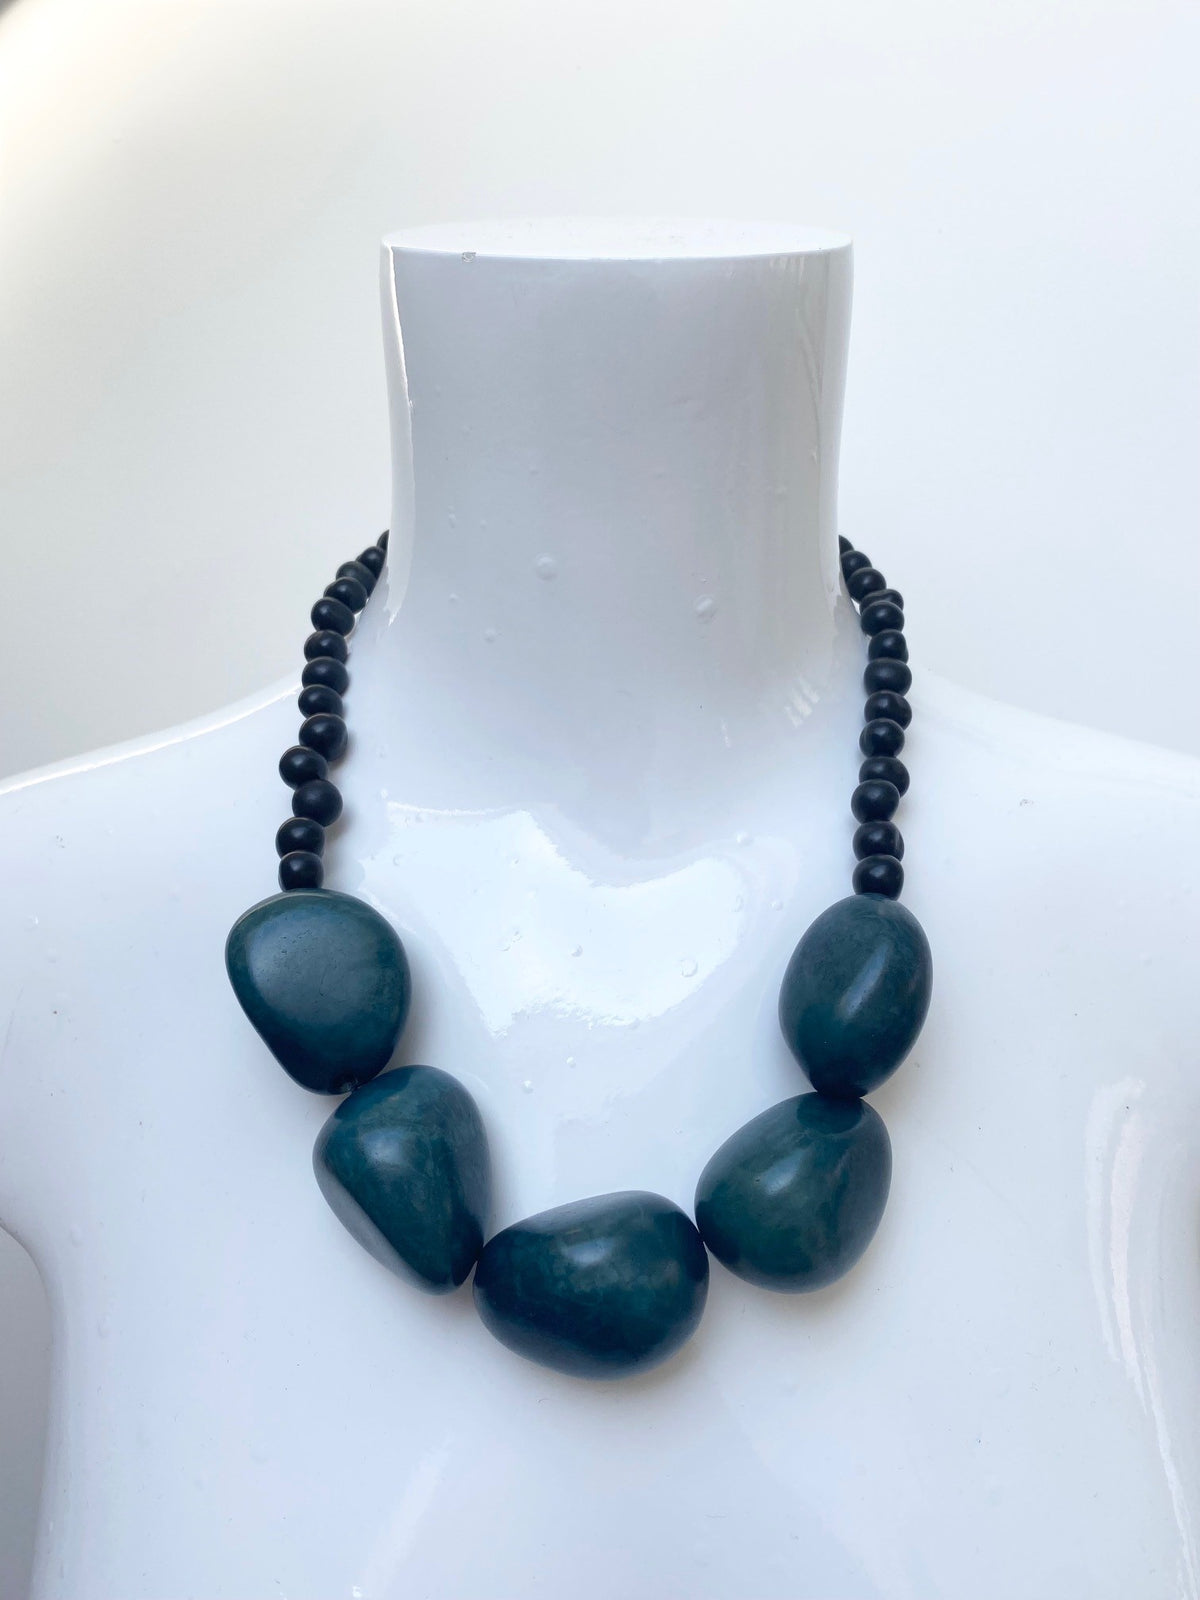 Tagua necklace x 5 - Navy